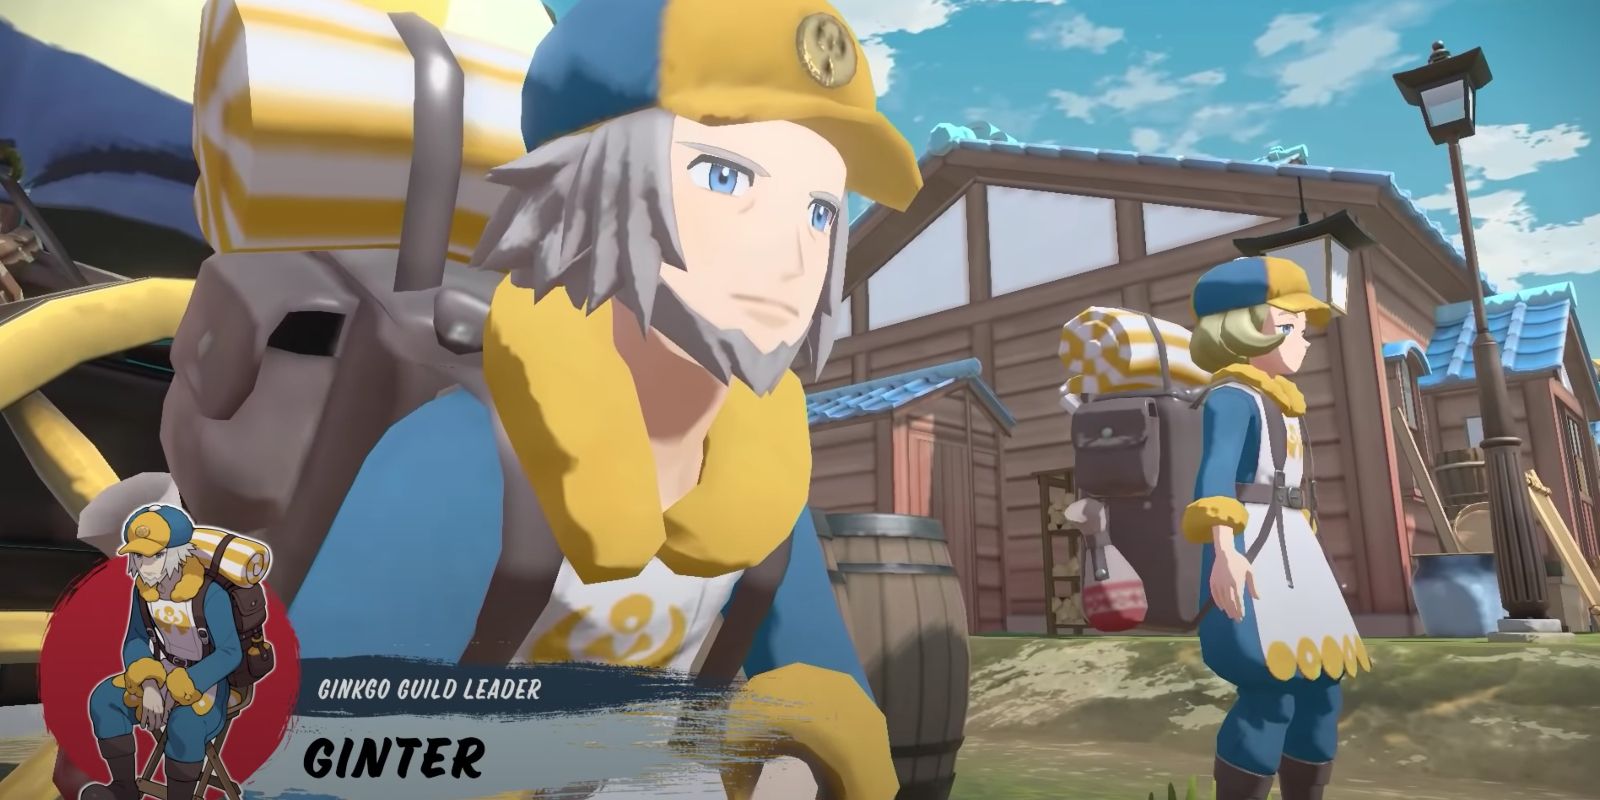 Ginter is the leader of the Ginkgo Guild in Pokemon Legends: Arceus.